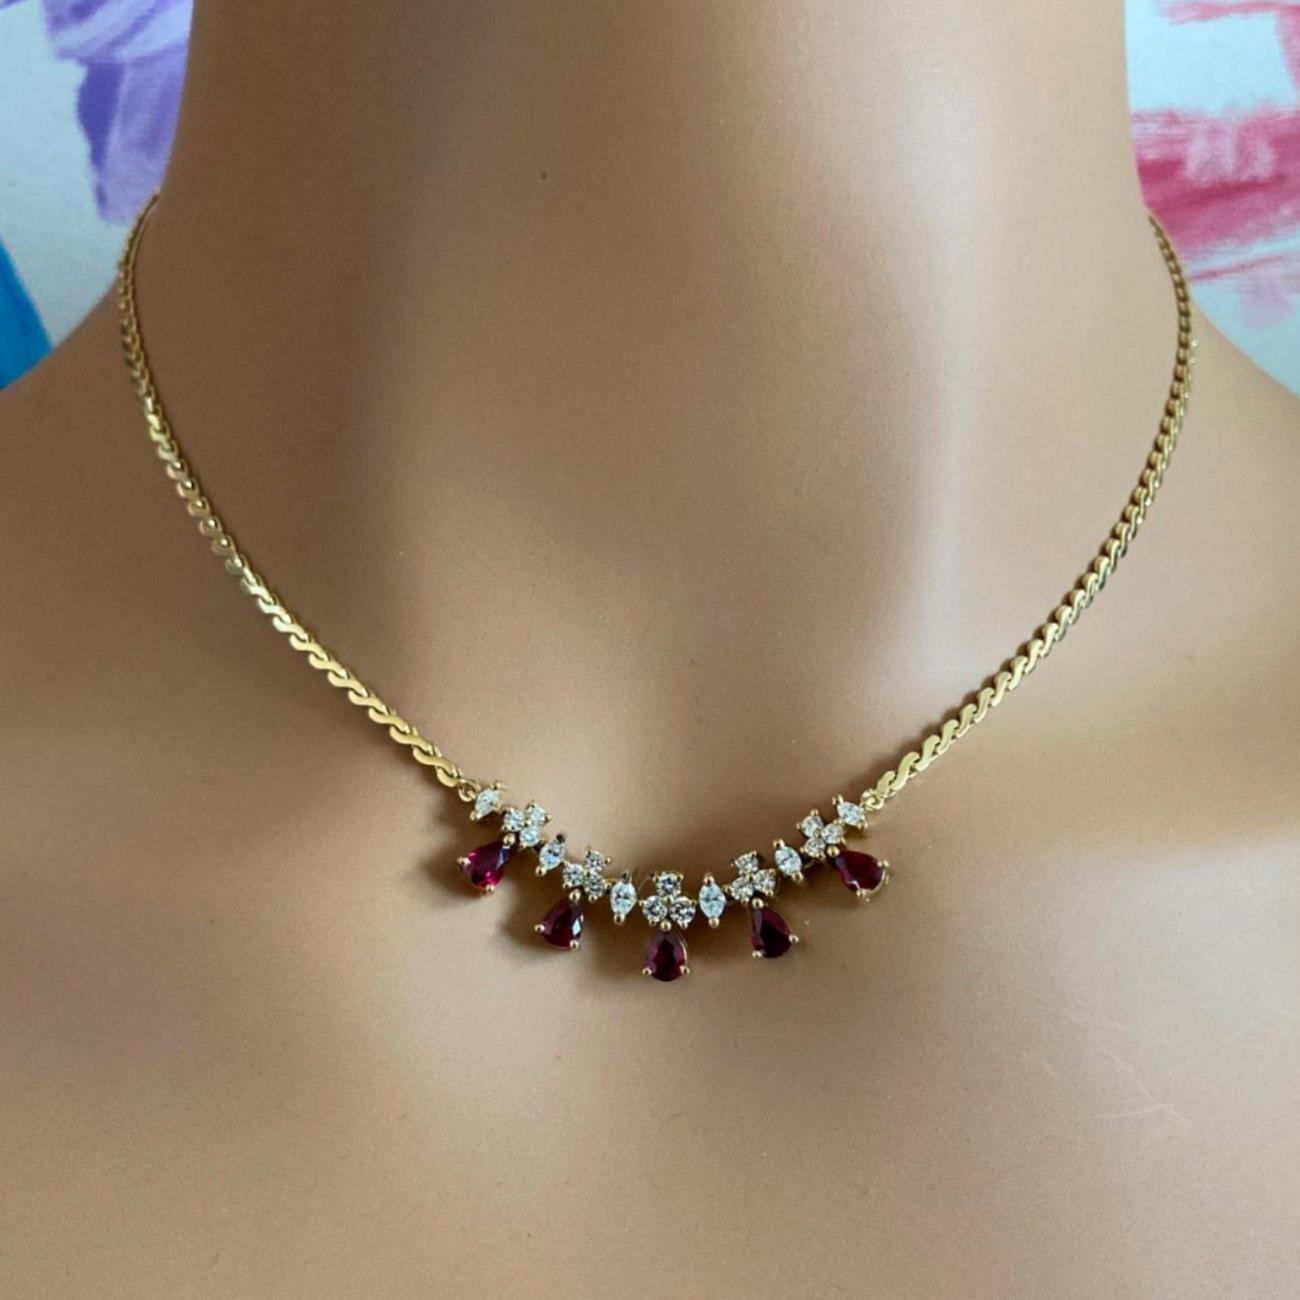 H. Stern Jewelry & Watches:Fine Jewelry:Necklaces & Pendants Rare! Authentic H. Stern 18k Yellow Gold White Diamond Ruby Necklace